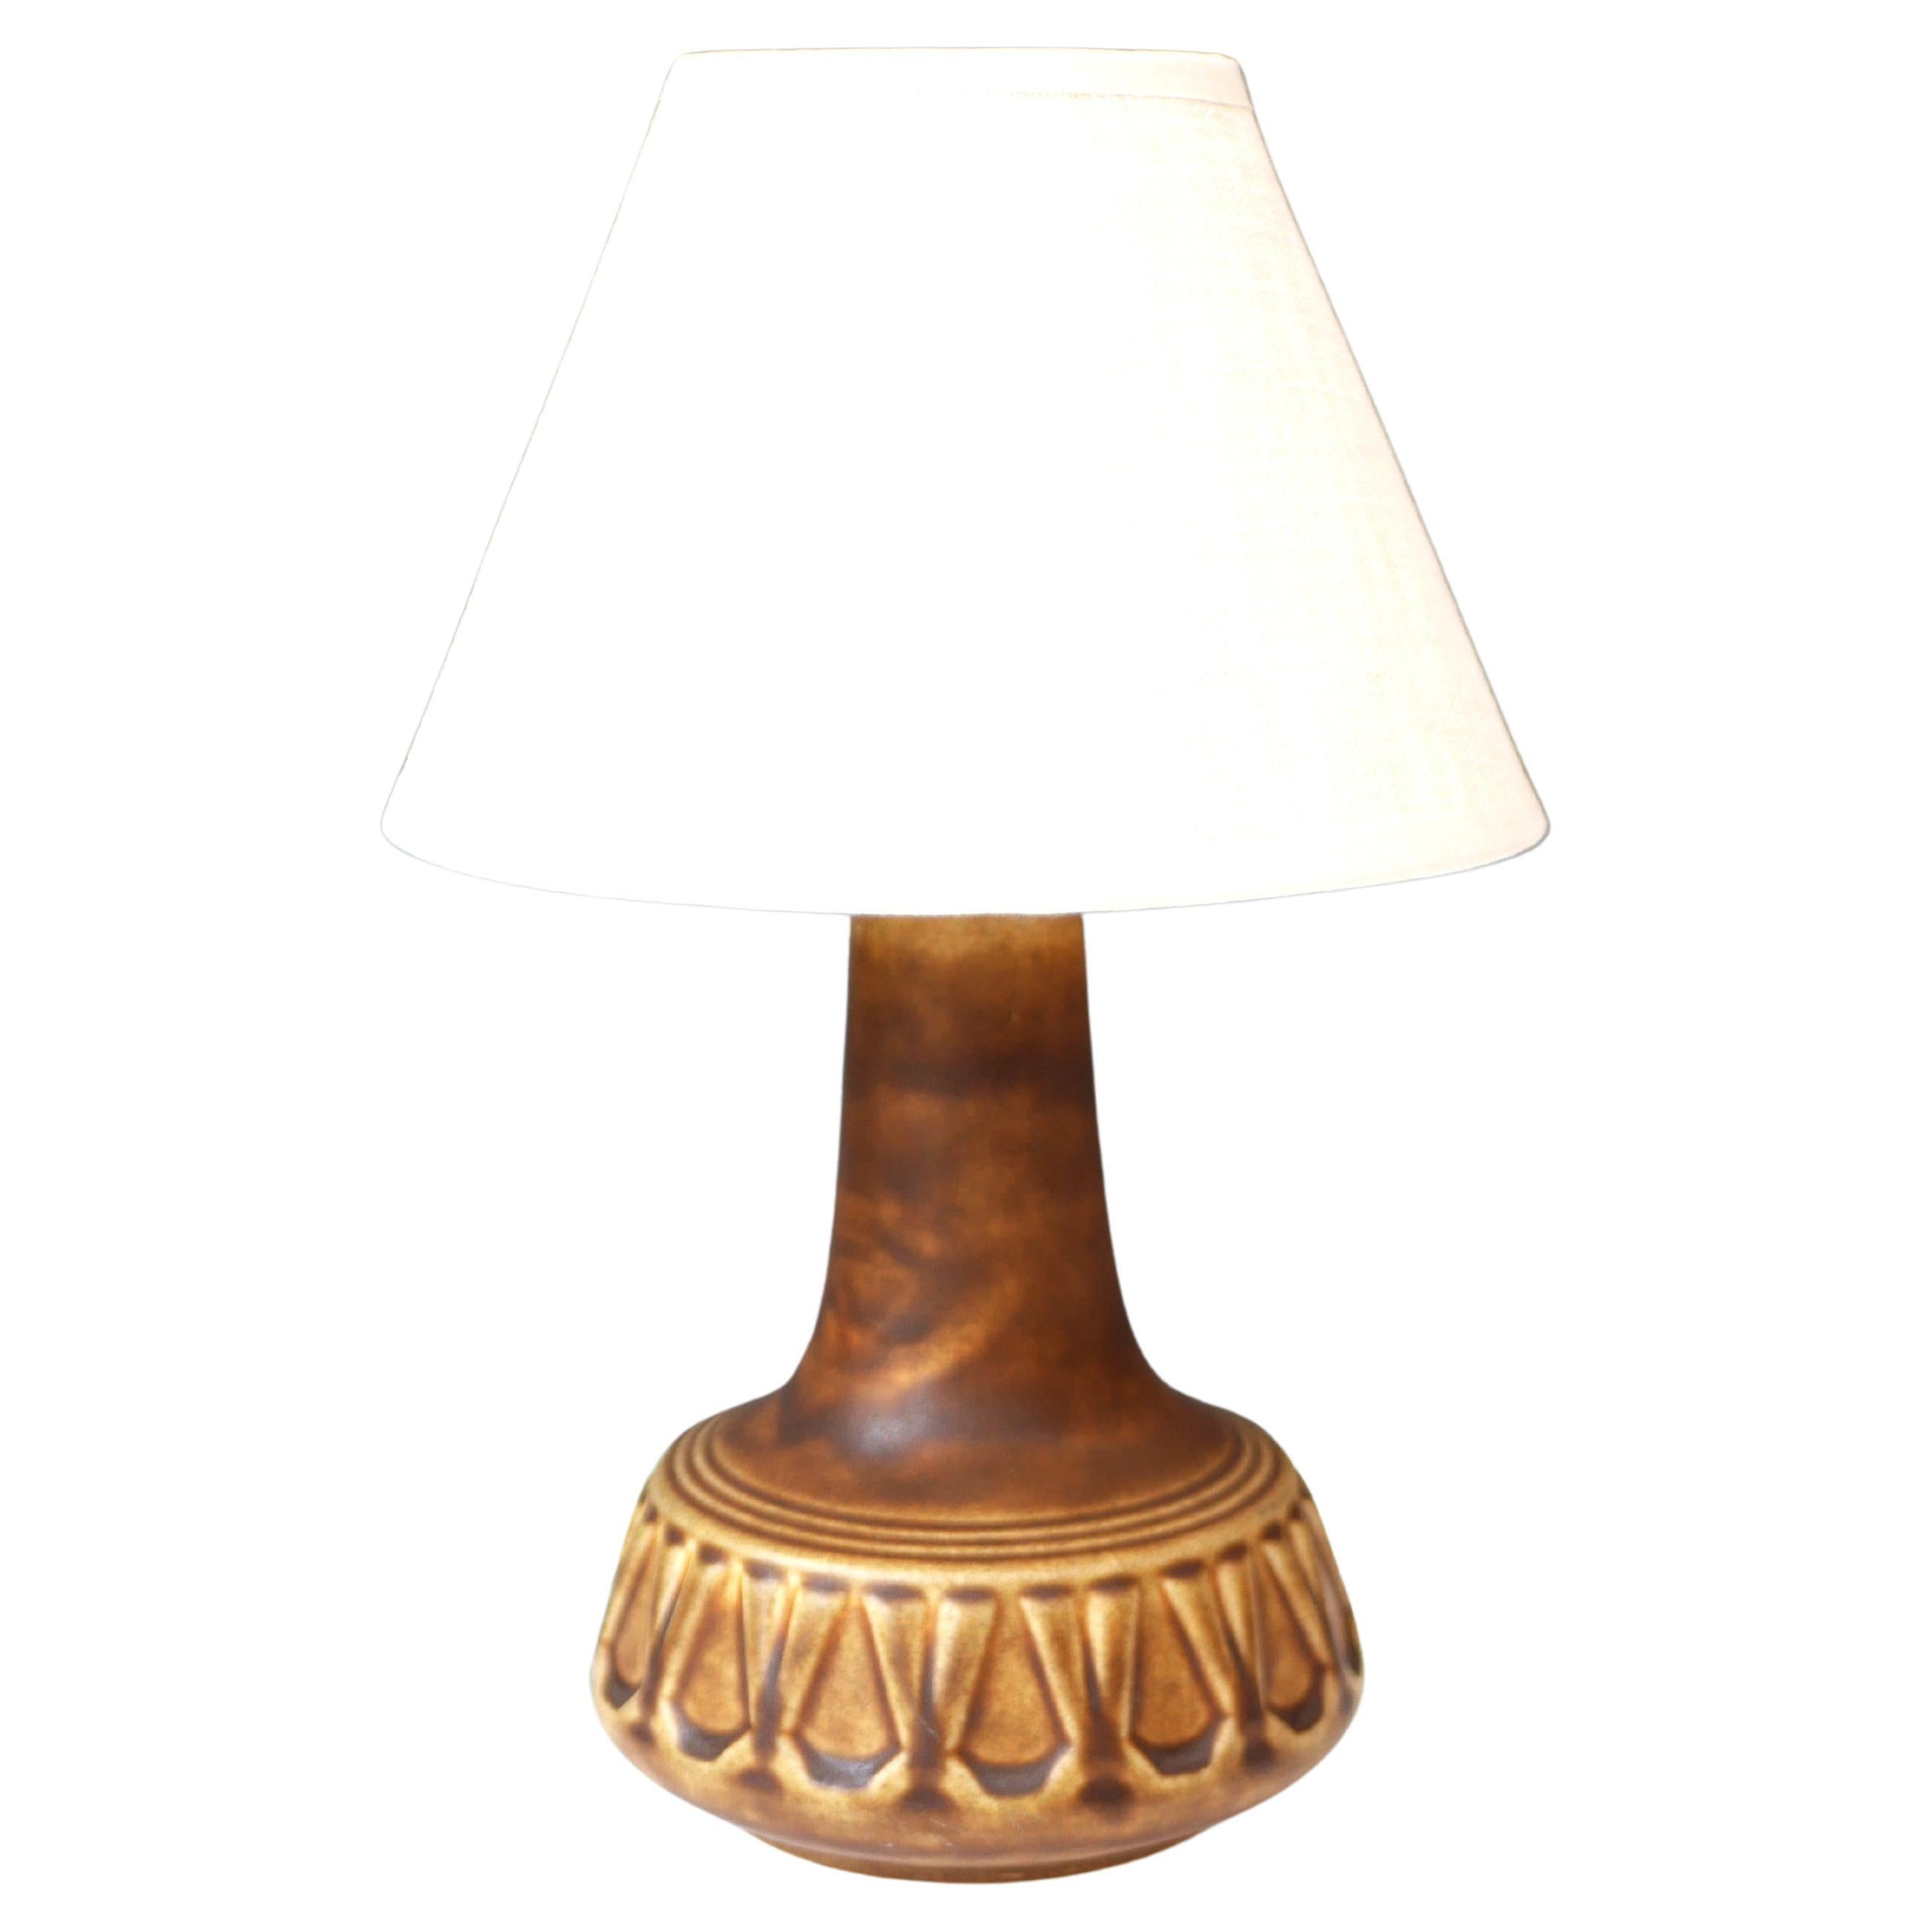 A very cute little vintage handmade ceramic stoneware lamp base made from Söholm, Denmark. This lamp is a classic, elegant and timeless lamp. The shape is rather unusual, wide base and slender neck, it has a contemporary feeling, yet it is the